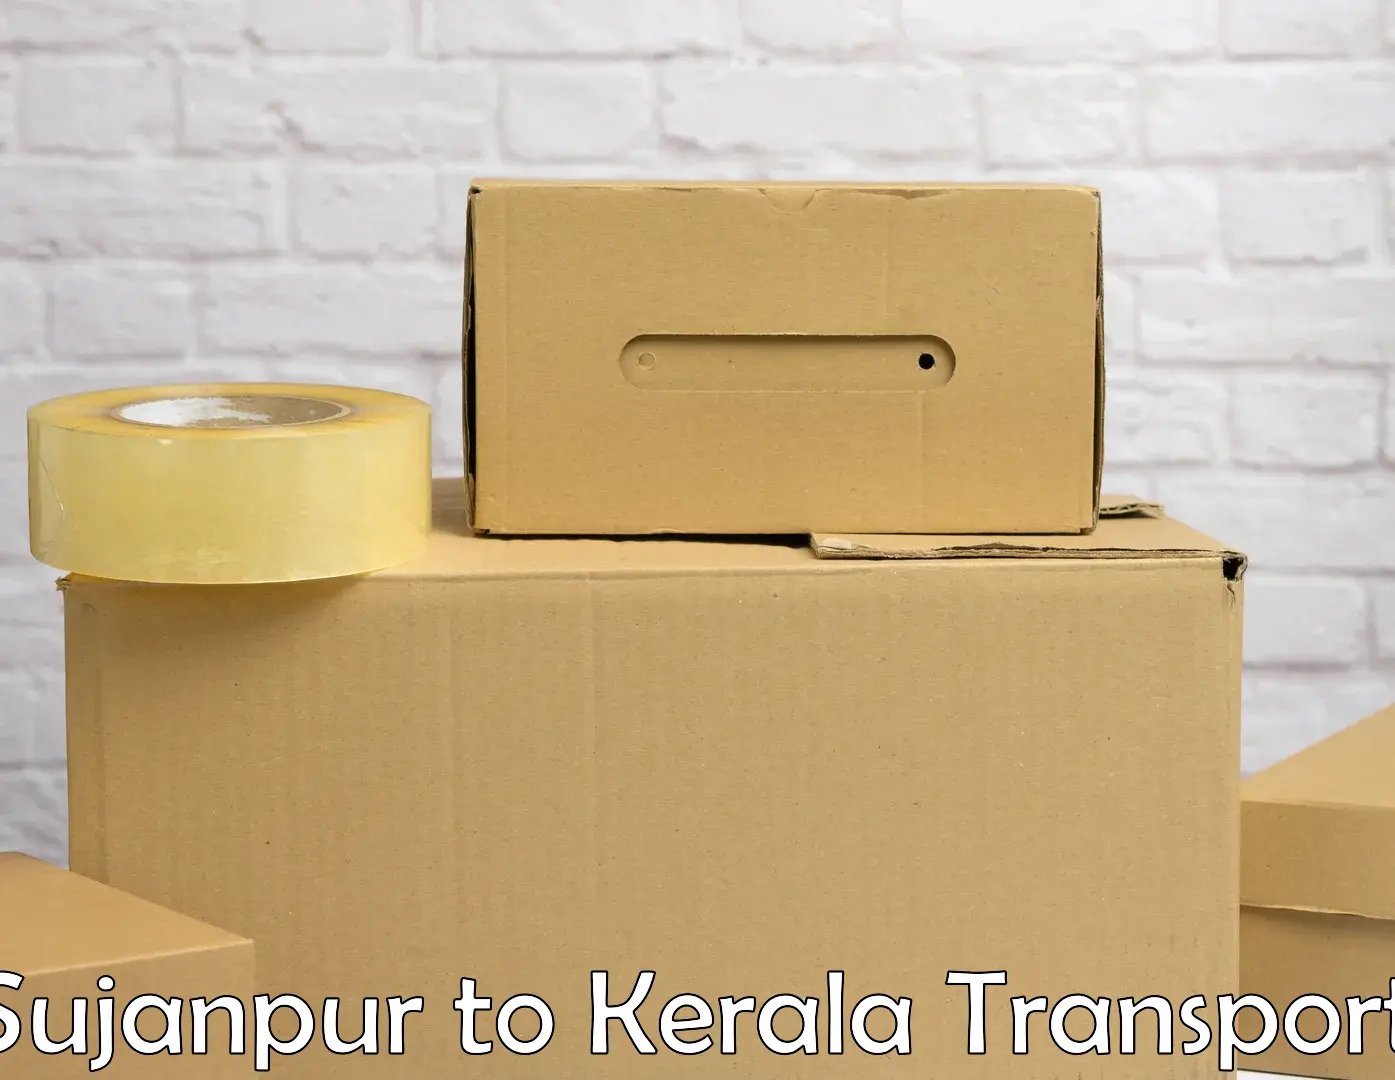 Nearby transport service in Sujanpur to Thamarassery